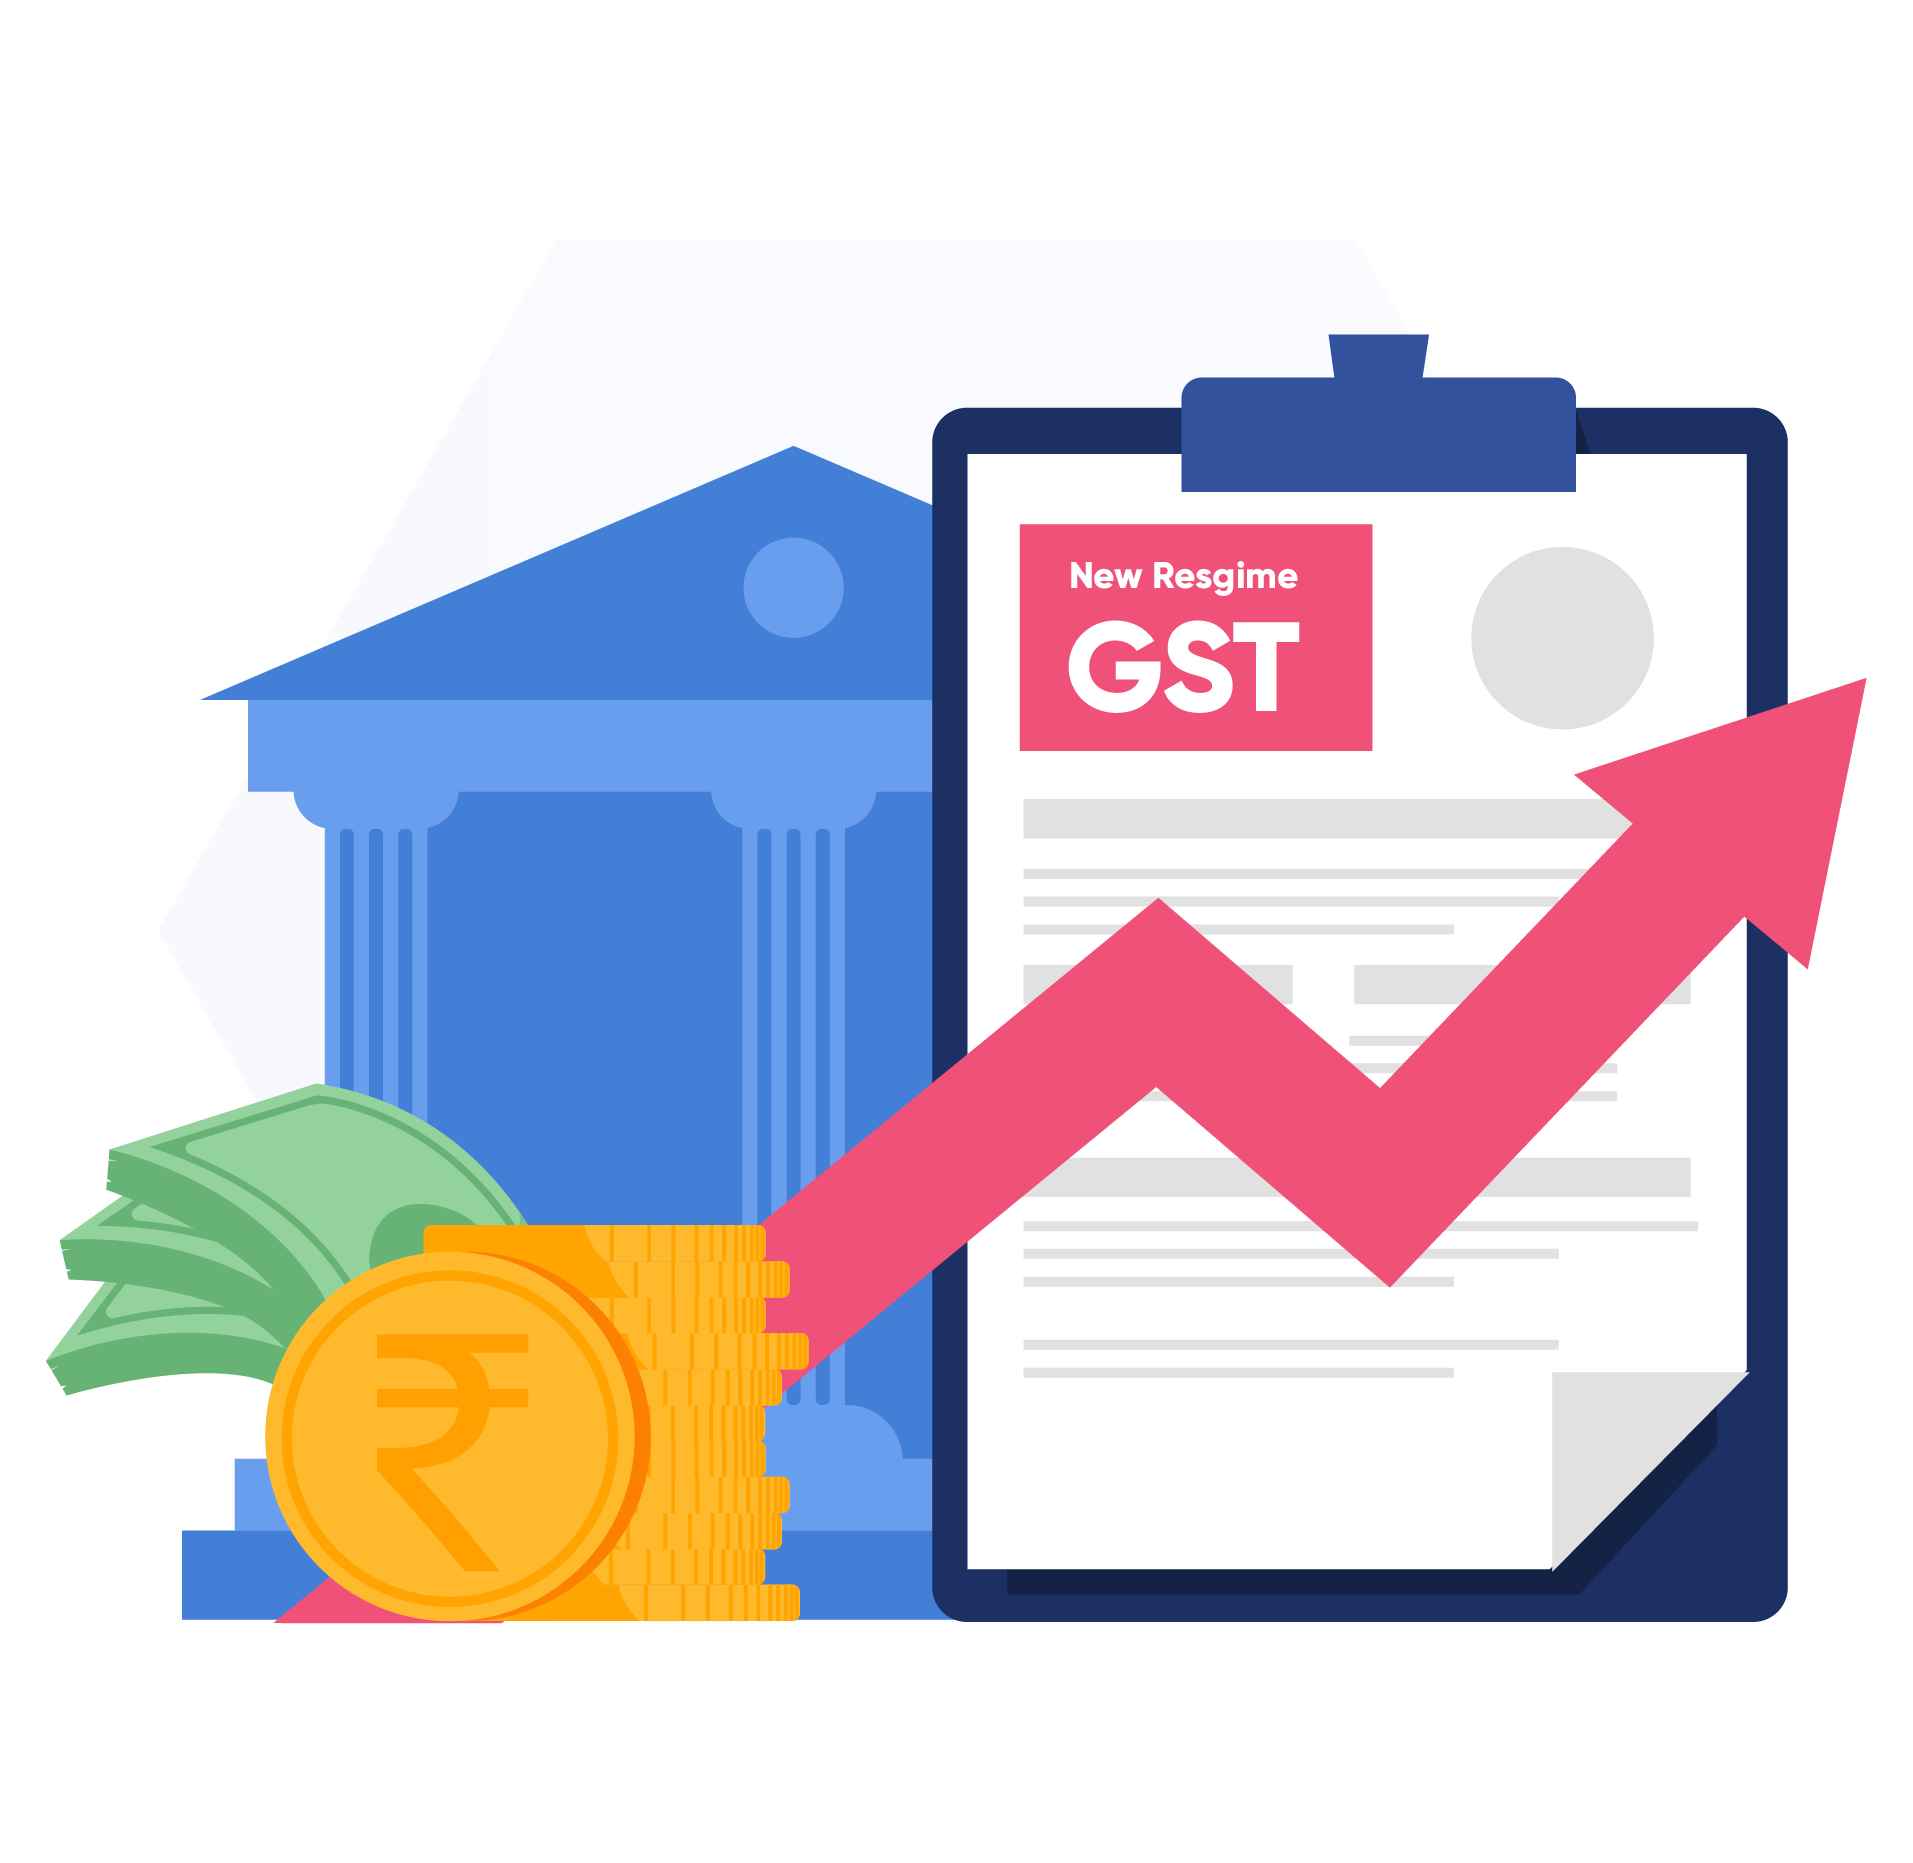 Impact of New GST Regime on Indian Finance